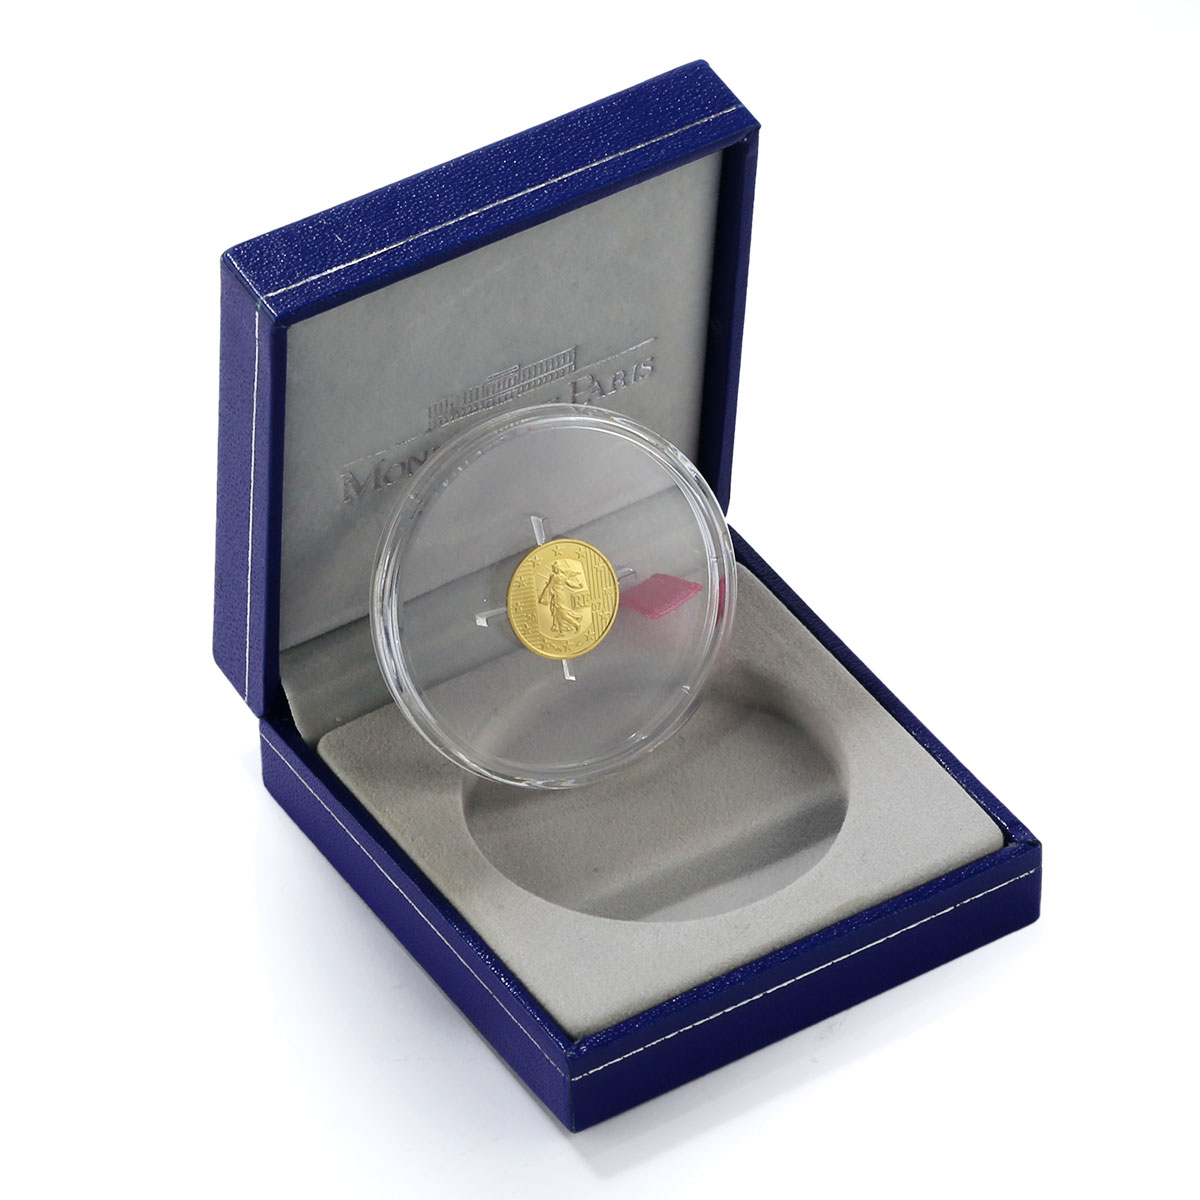 France 5 euro 5th Anniversary of the Euro Freedom Equality Fraternity gold 2007